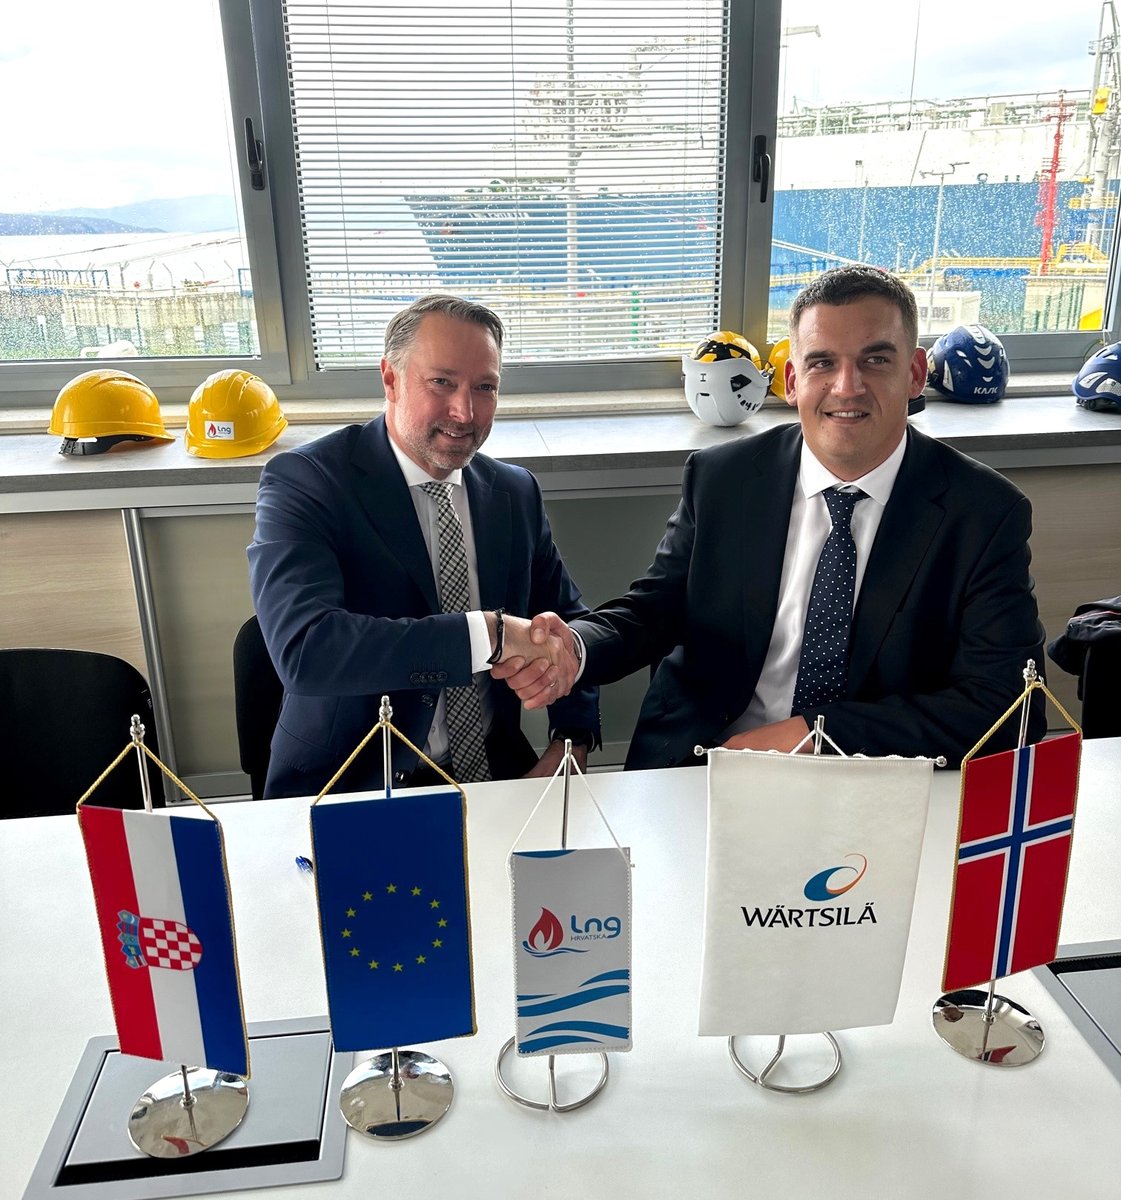 #HotOffThePress - We are delighted to extend the capacity of the #regasification system installed onboard the ‘LNG Croatia’ with a new regasification module. wartsi.ly/3peJhyD

#GasSolutions #regasification #LNG